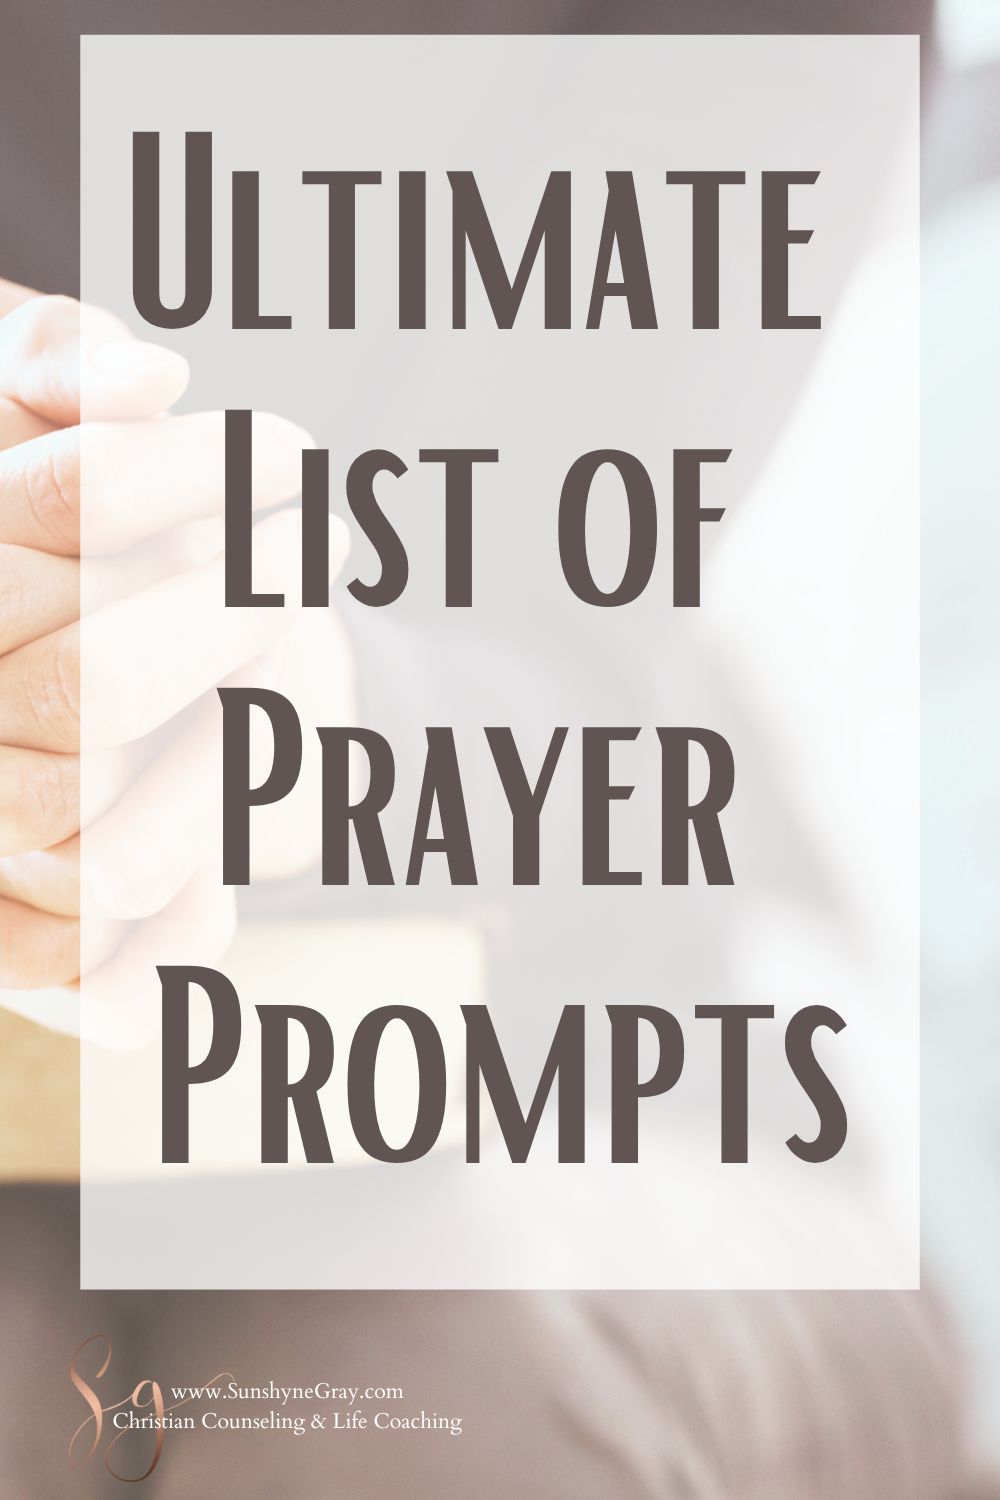 Ultimate List of Prayer Prompts - Christian Counseling